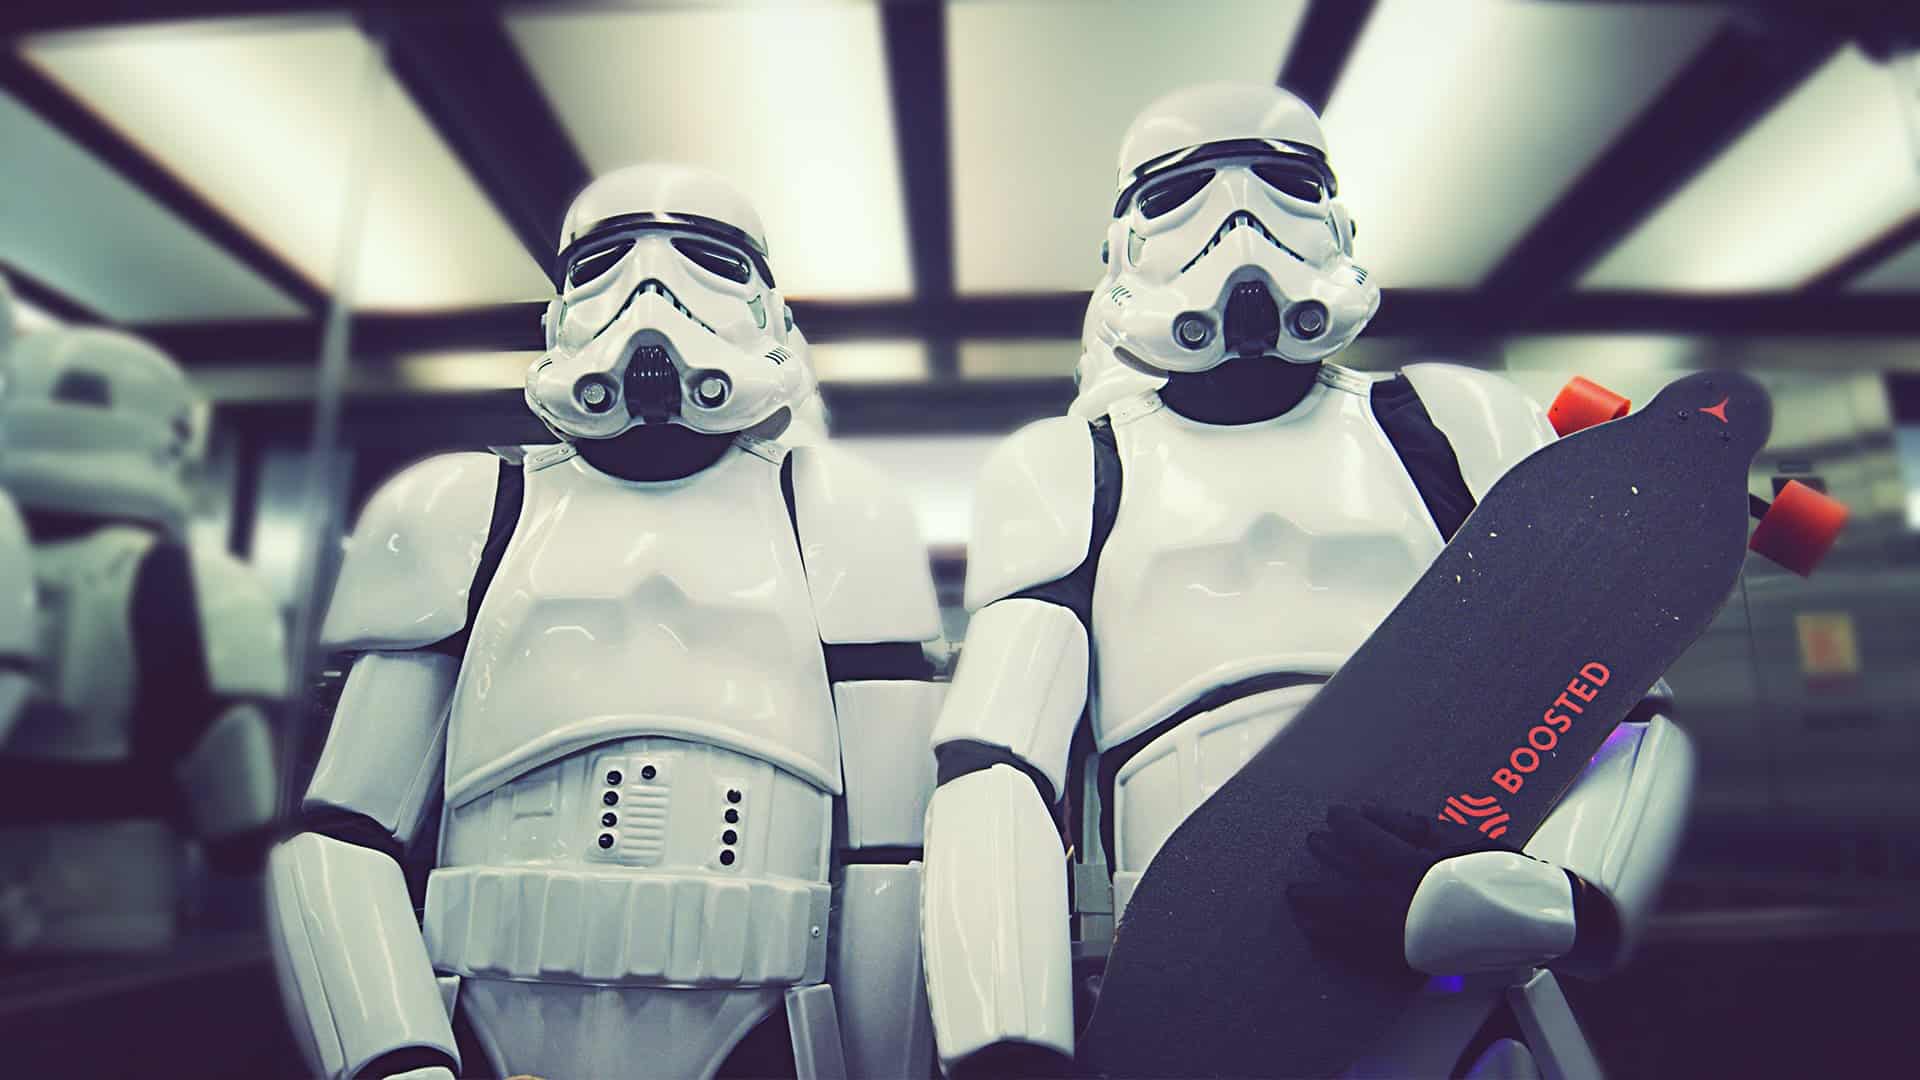 Stormtroopers longboarding through the city